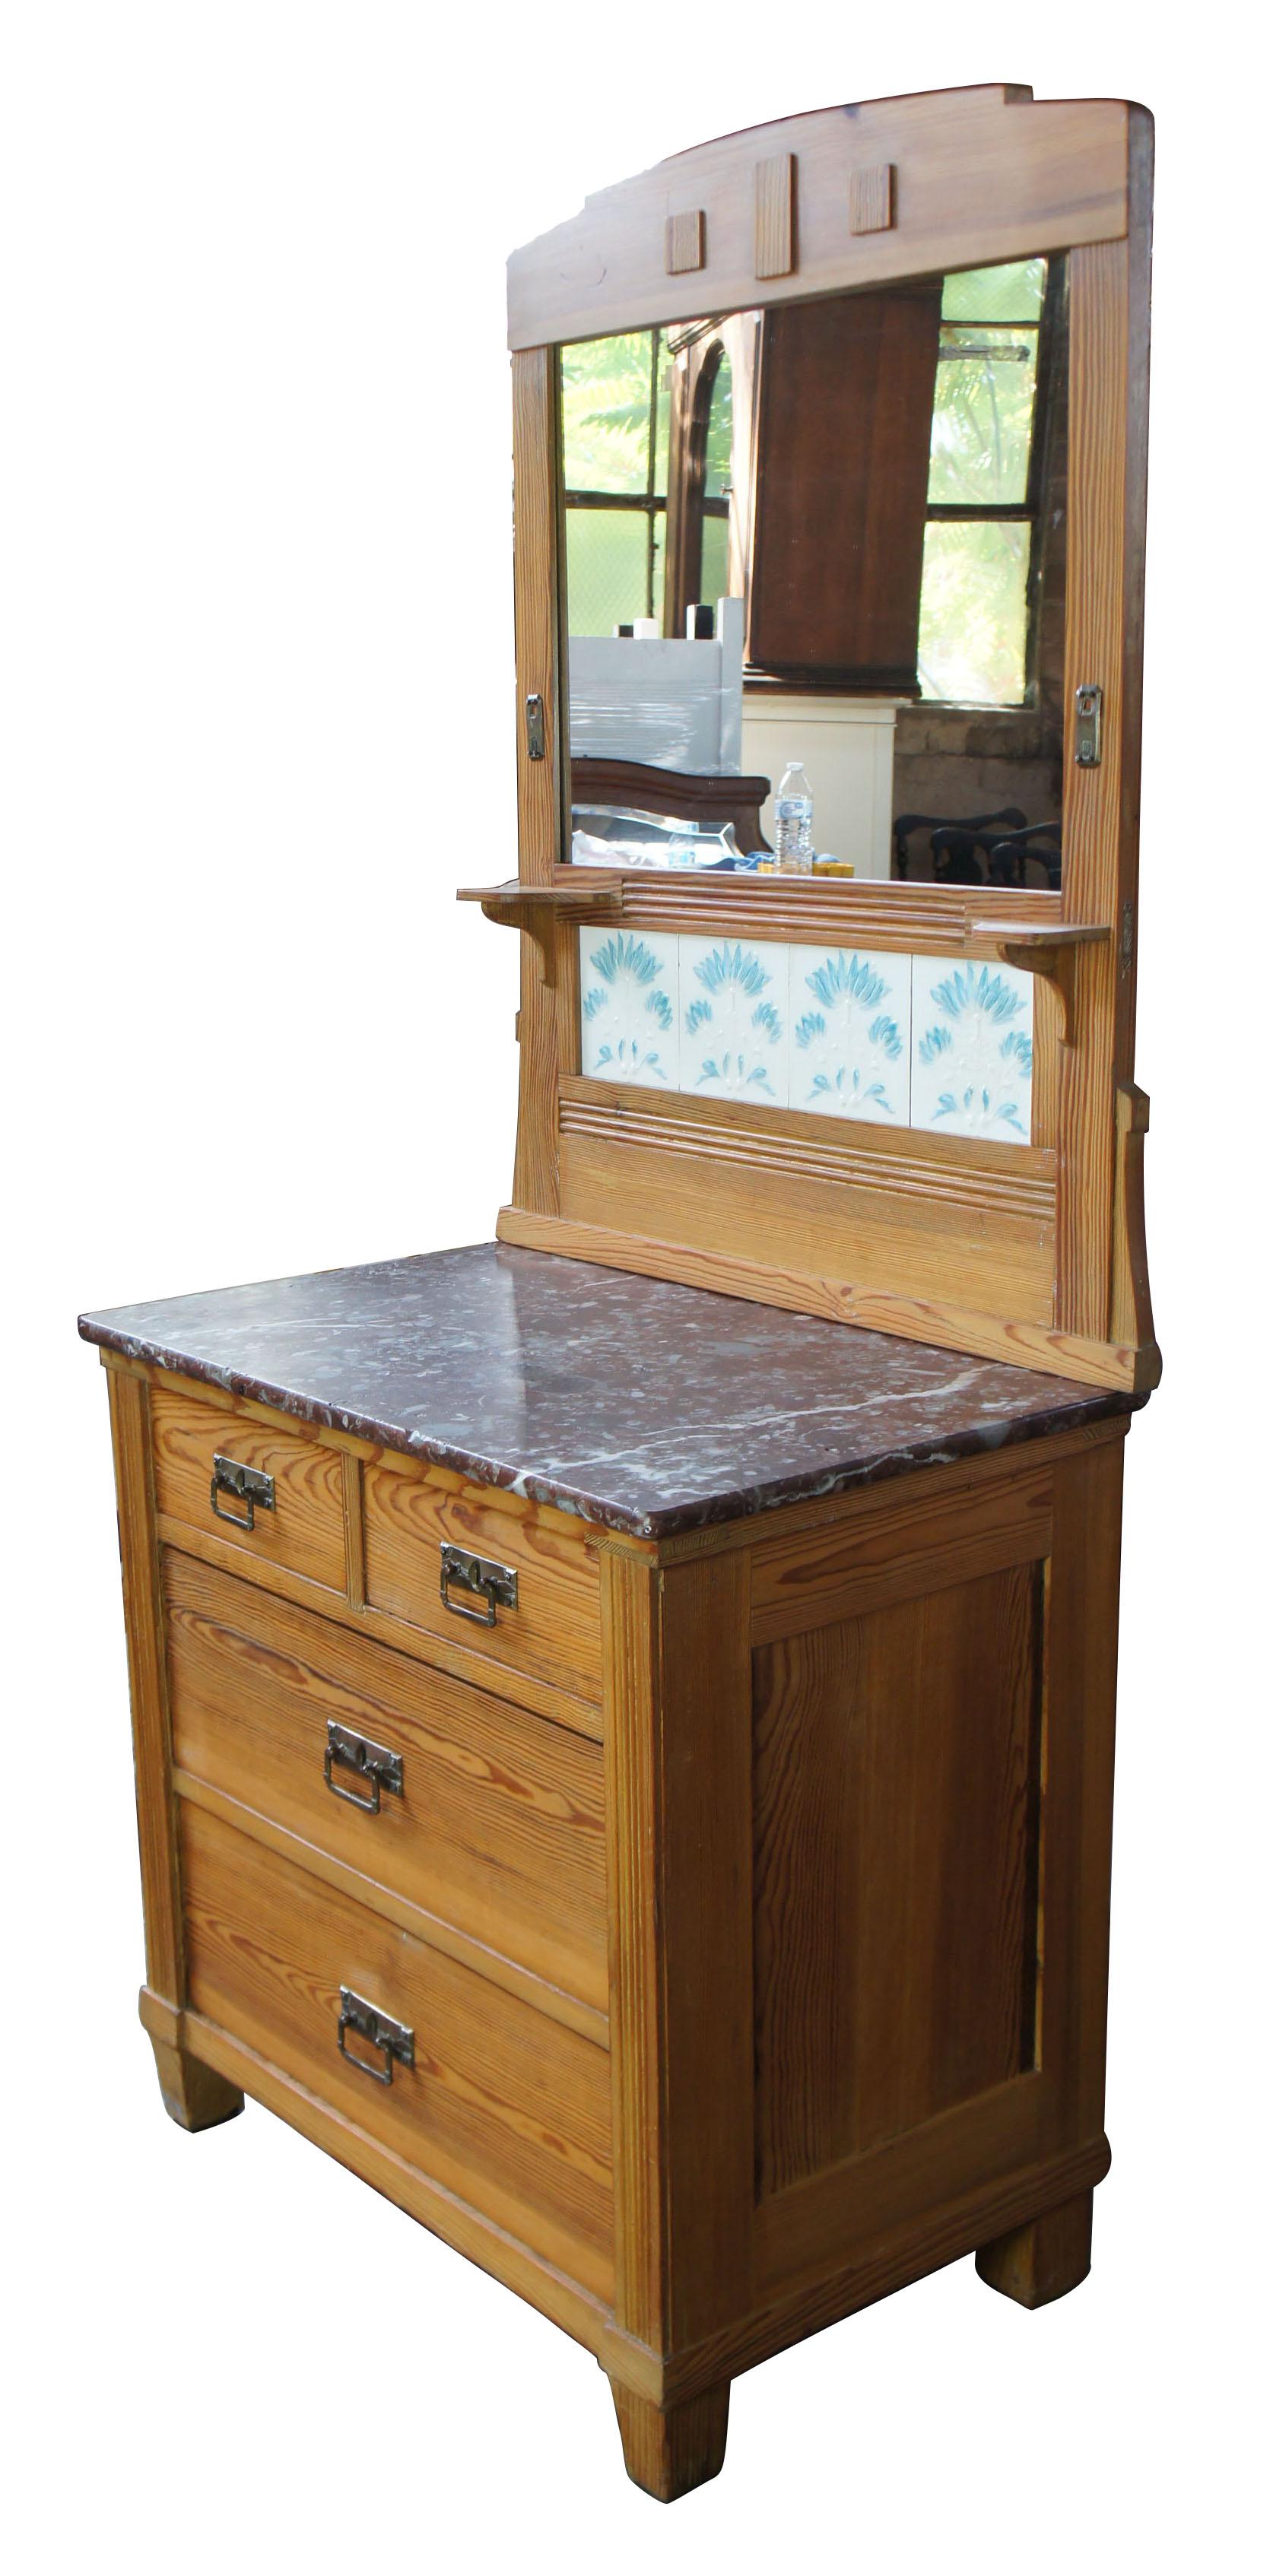 Victorian antique pine marble-top wash stand buffet M.O. P.F. German Tile mirror

Turn of the century solid pine marble-top washstand with tiled and mirrored back. Features 4 hand dovetailed drawers and brass hardware.

German Art Nouveau Tiles,